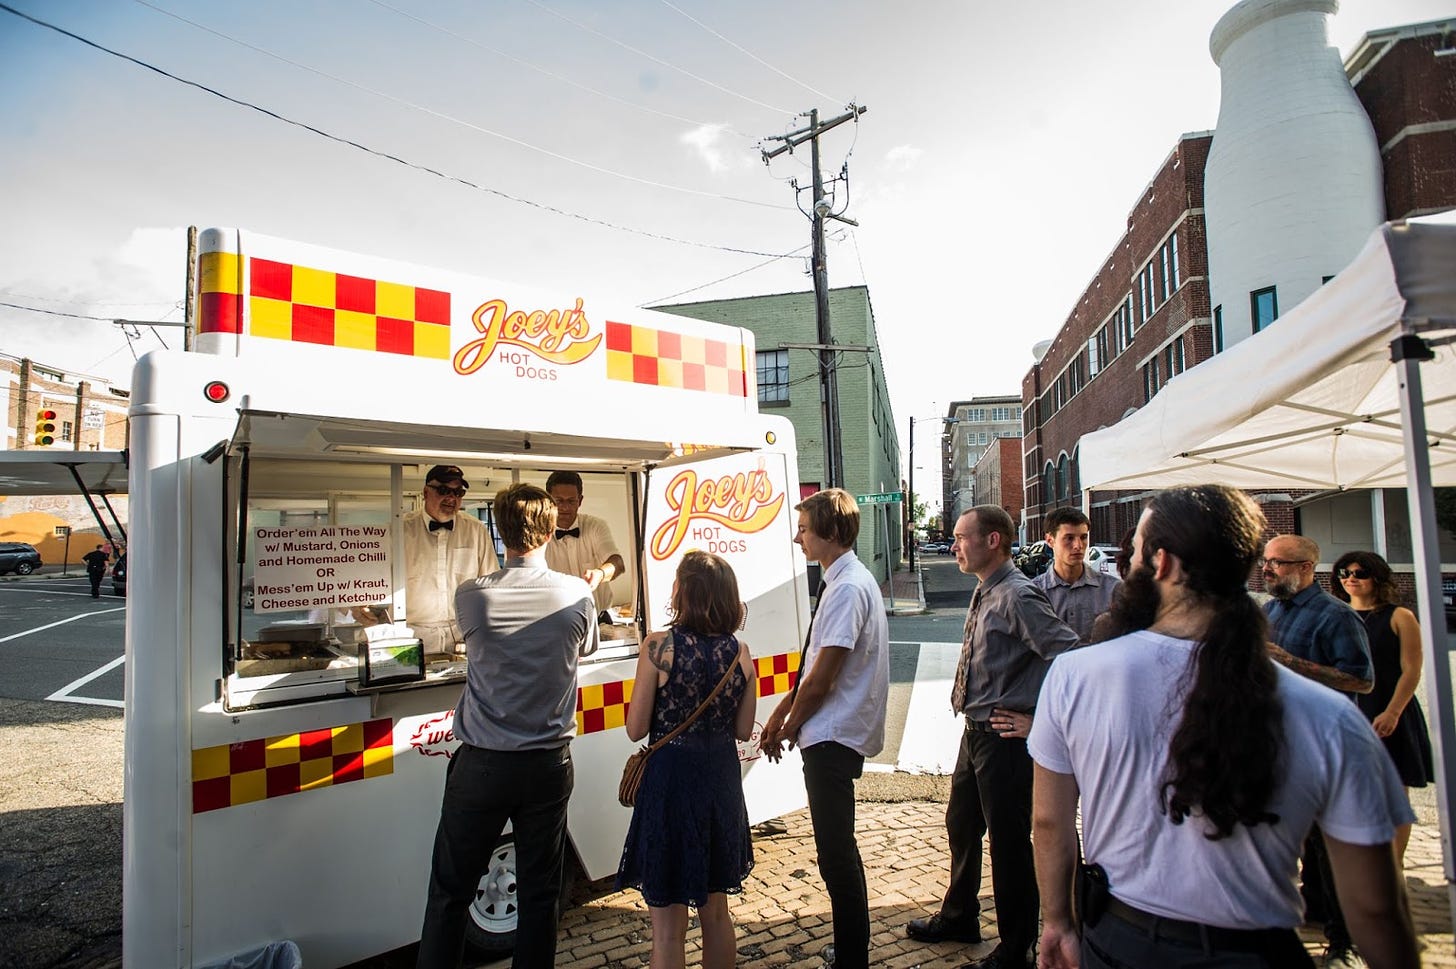 A picture of Joey's Hot Dog truck serving wedding guests on a city street. 